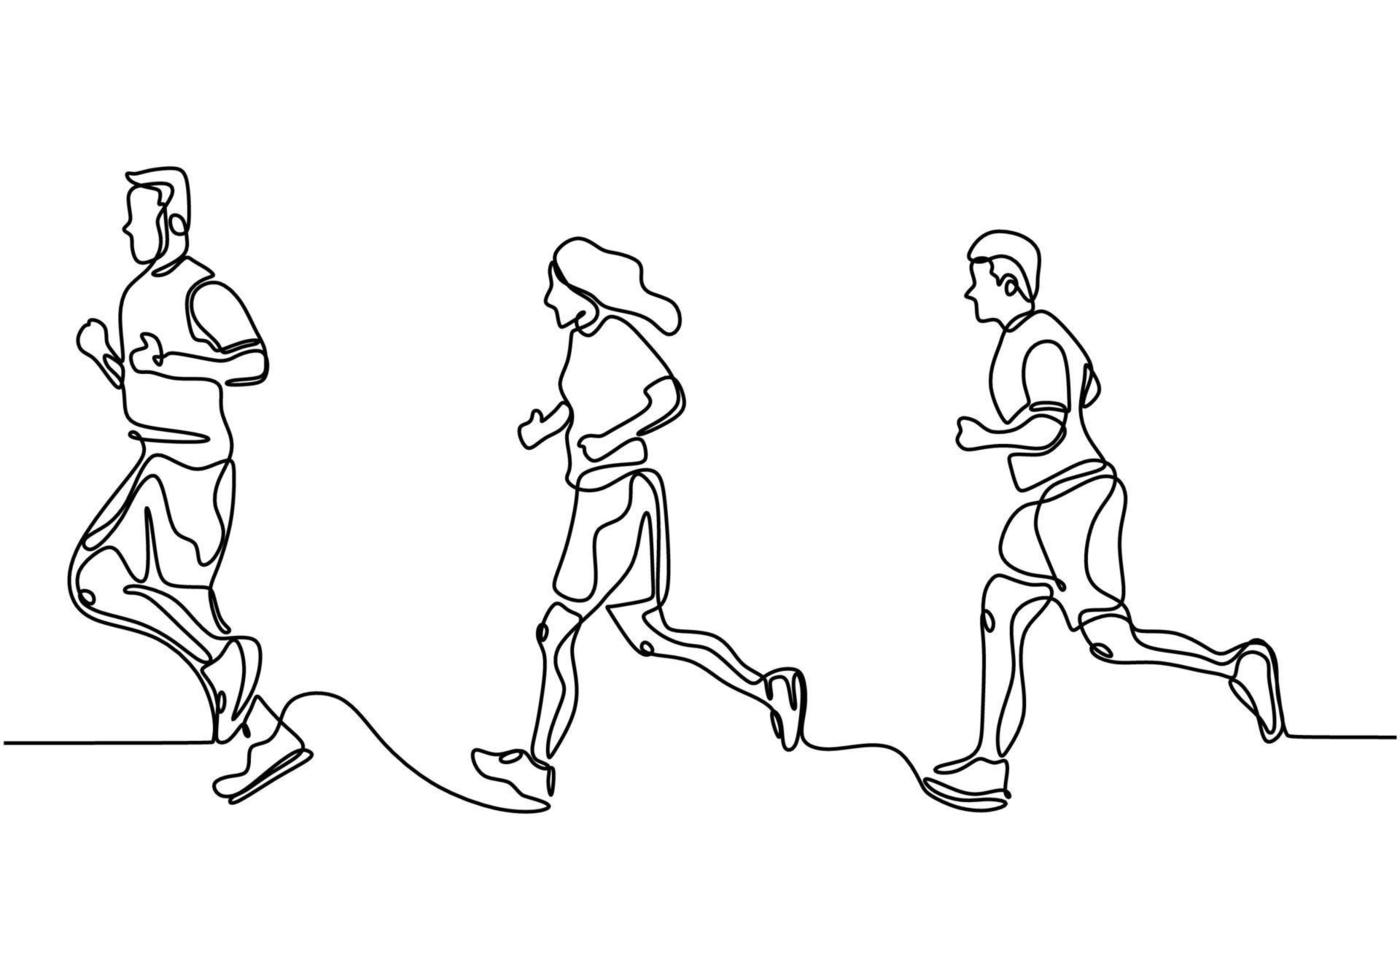 People running continuous one line drawing minimalism design vector